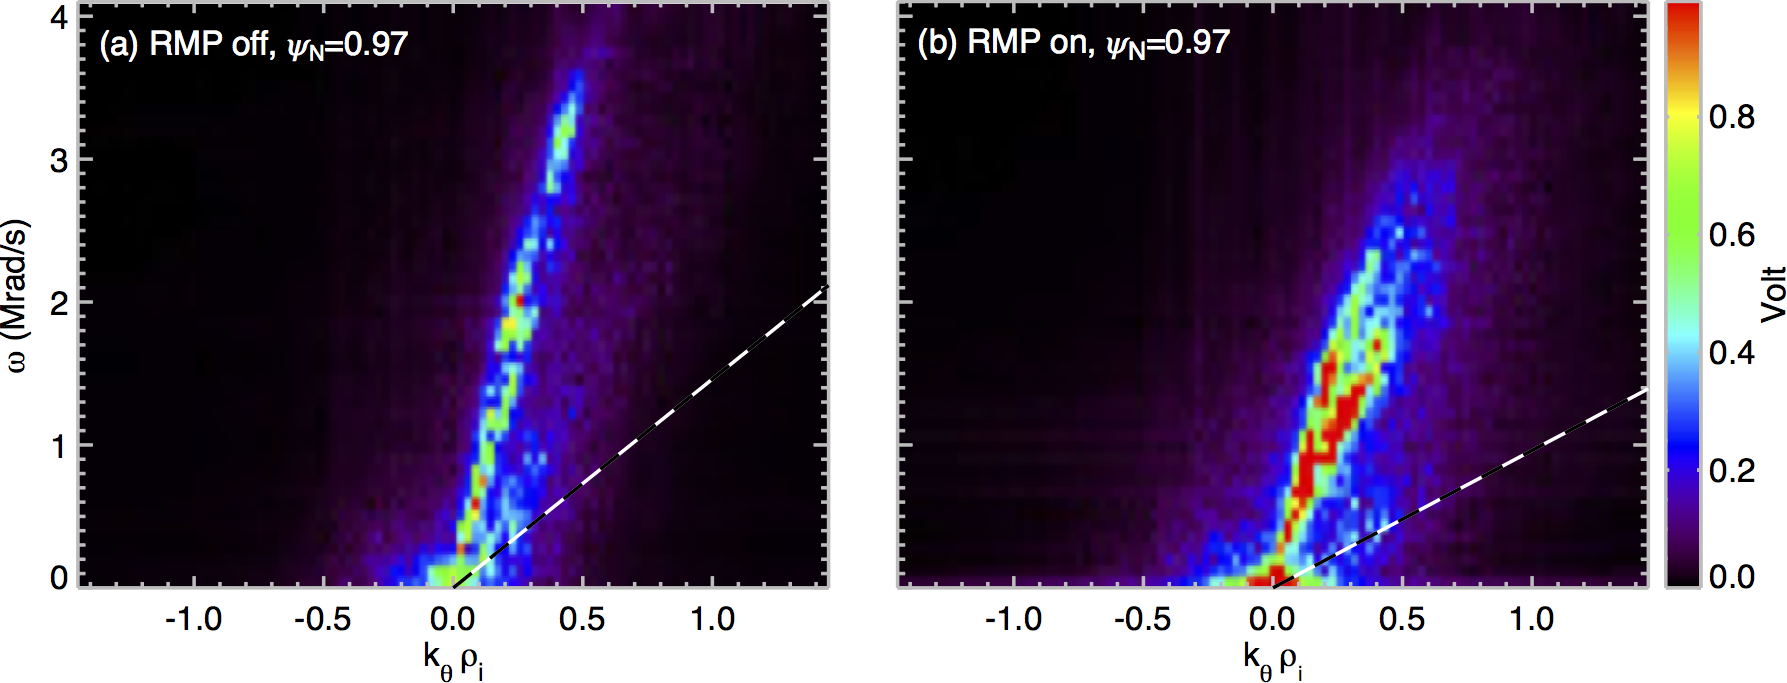 Fluctuation spectra of the electrostatic potential at $\psi_N=0.97$ (a) without RMPs and (b) with RMPs, showing enhanced fluctation level at lower frequency in (b). The dashed lines indicate the poloidal ExB velocity.